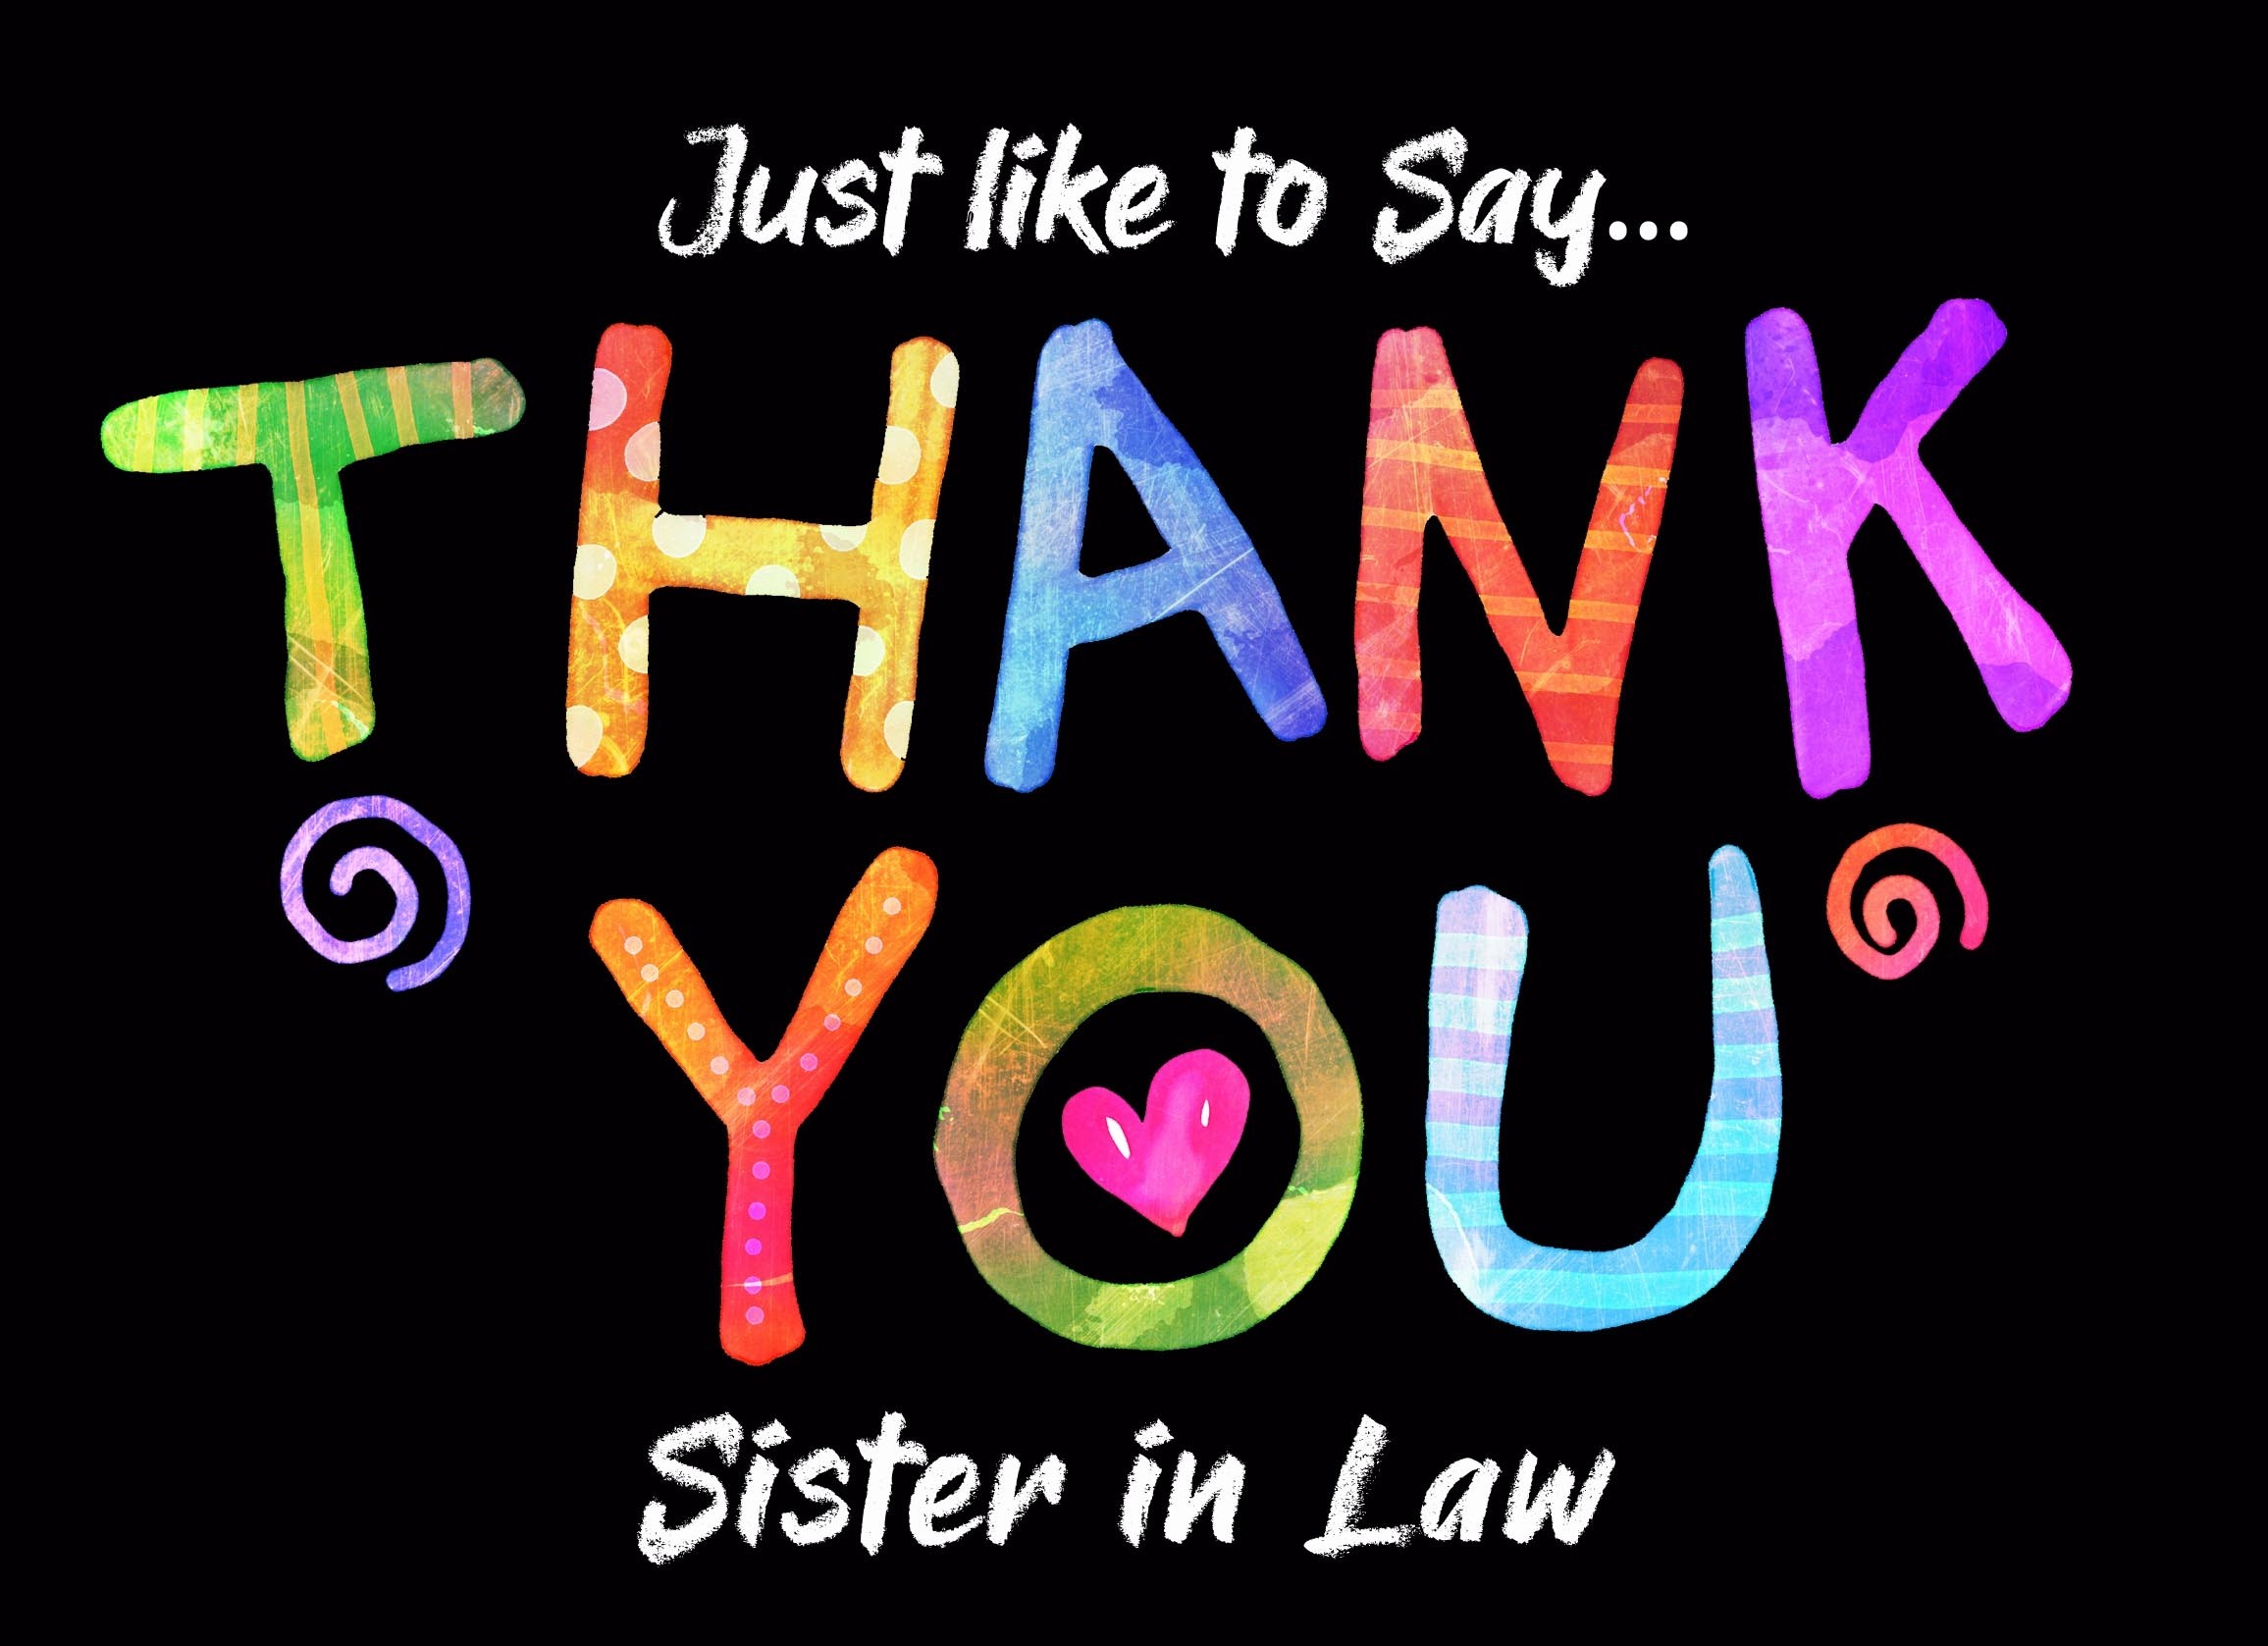 Thank You 'Sister in Law' Greeting Card